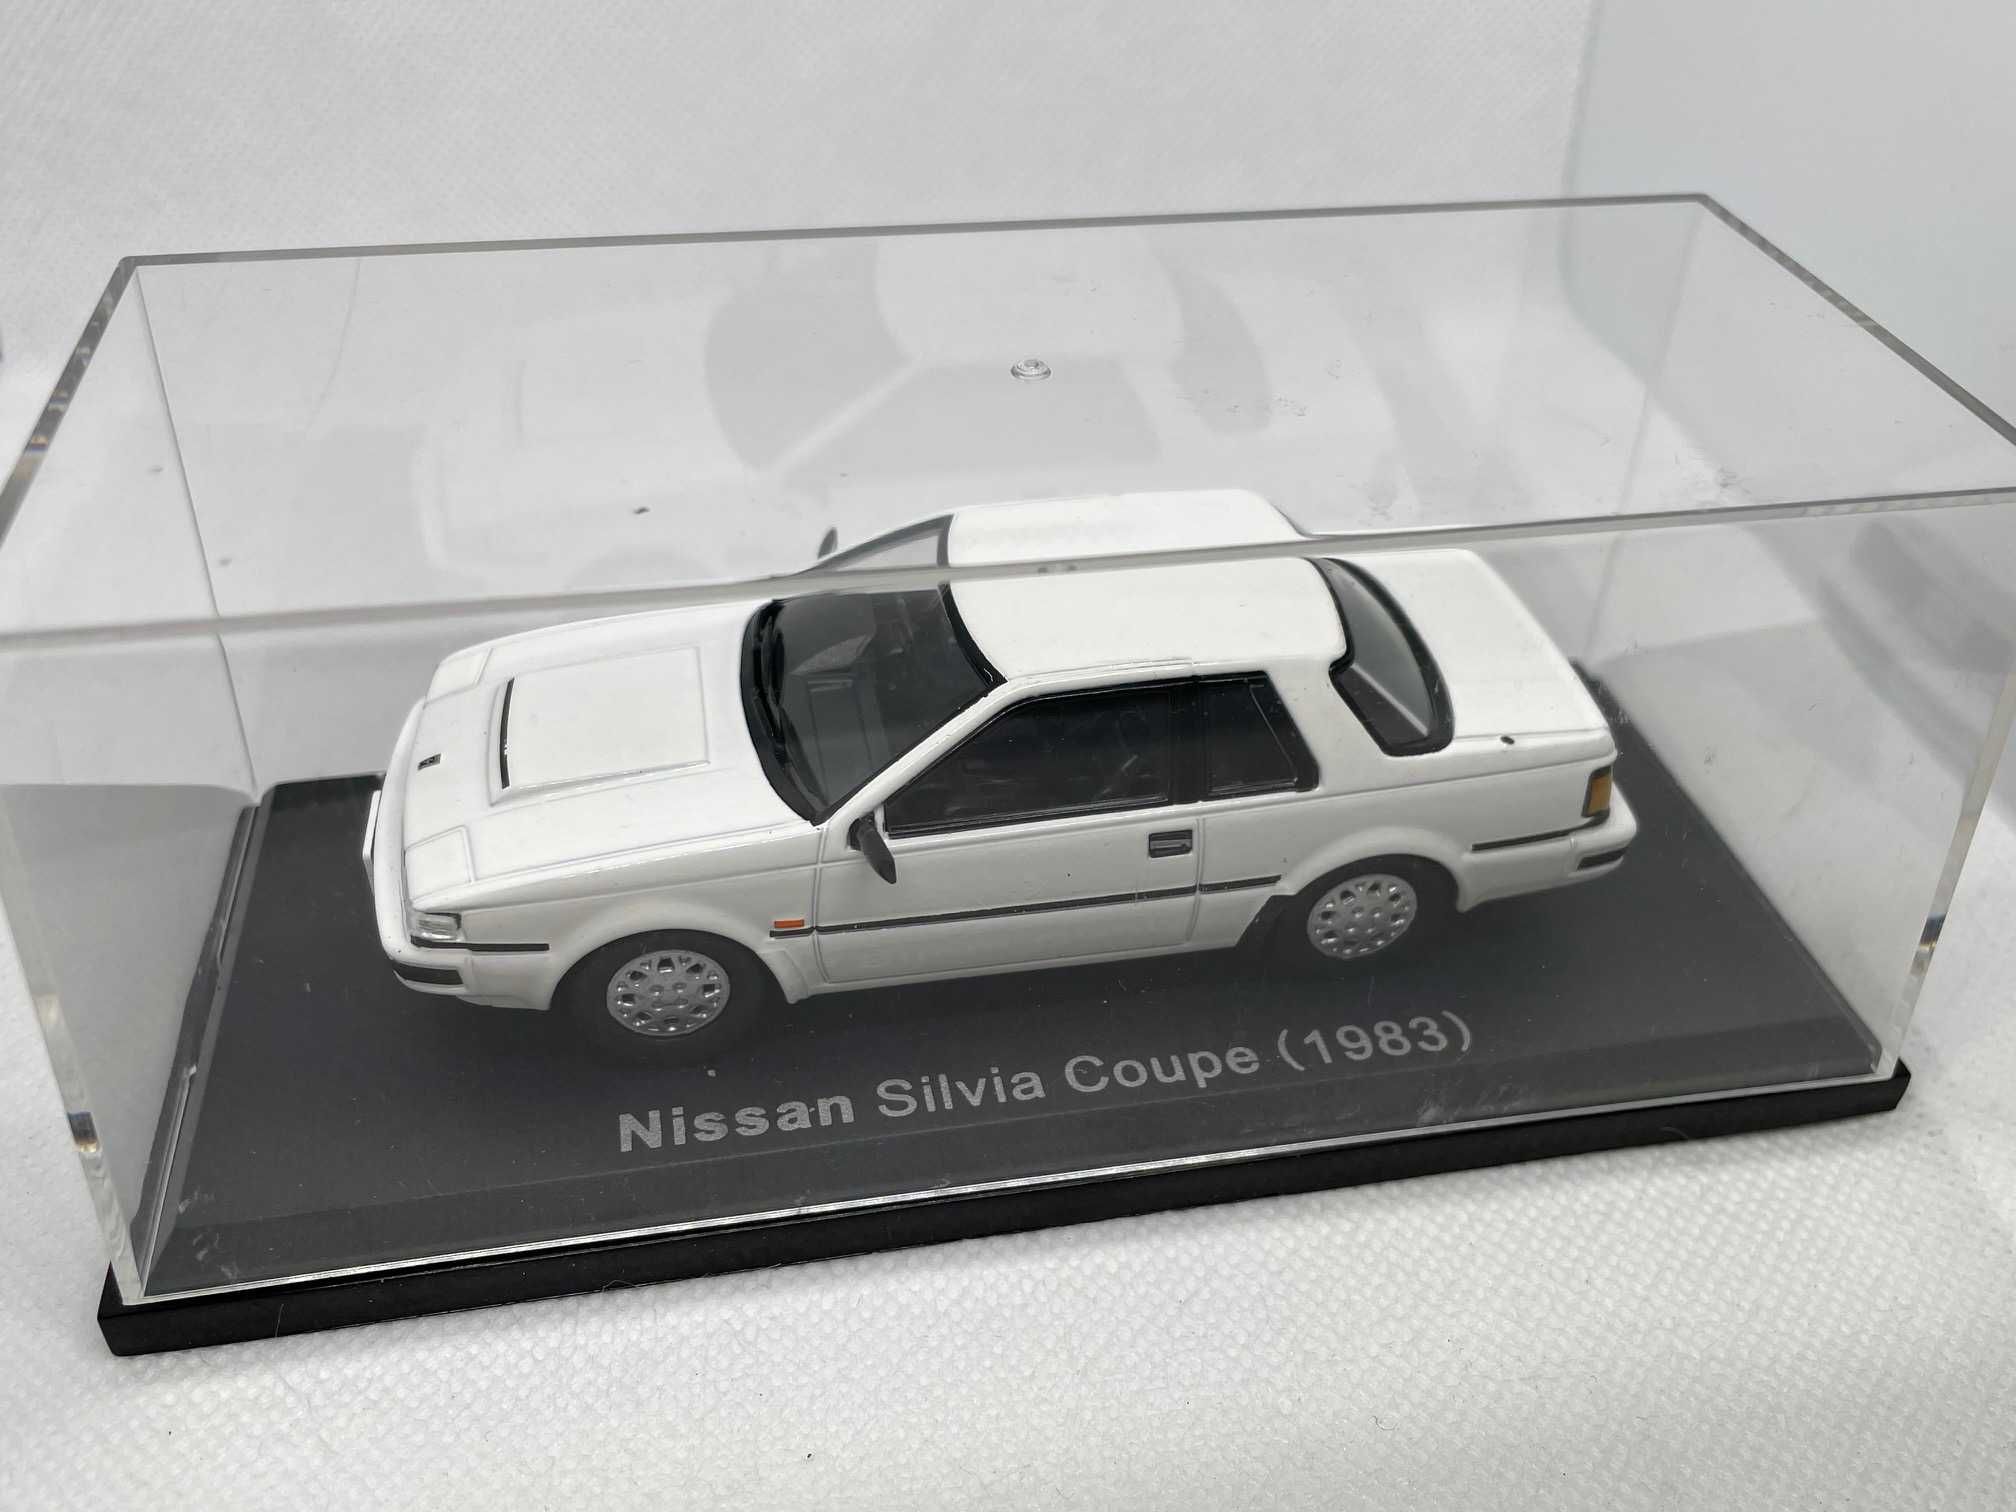 1/43 Nissan Silvia Coupe 1983 Norev